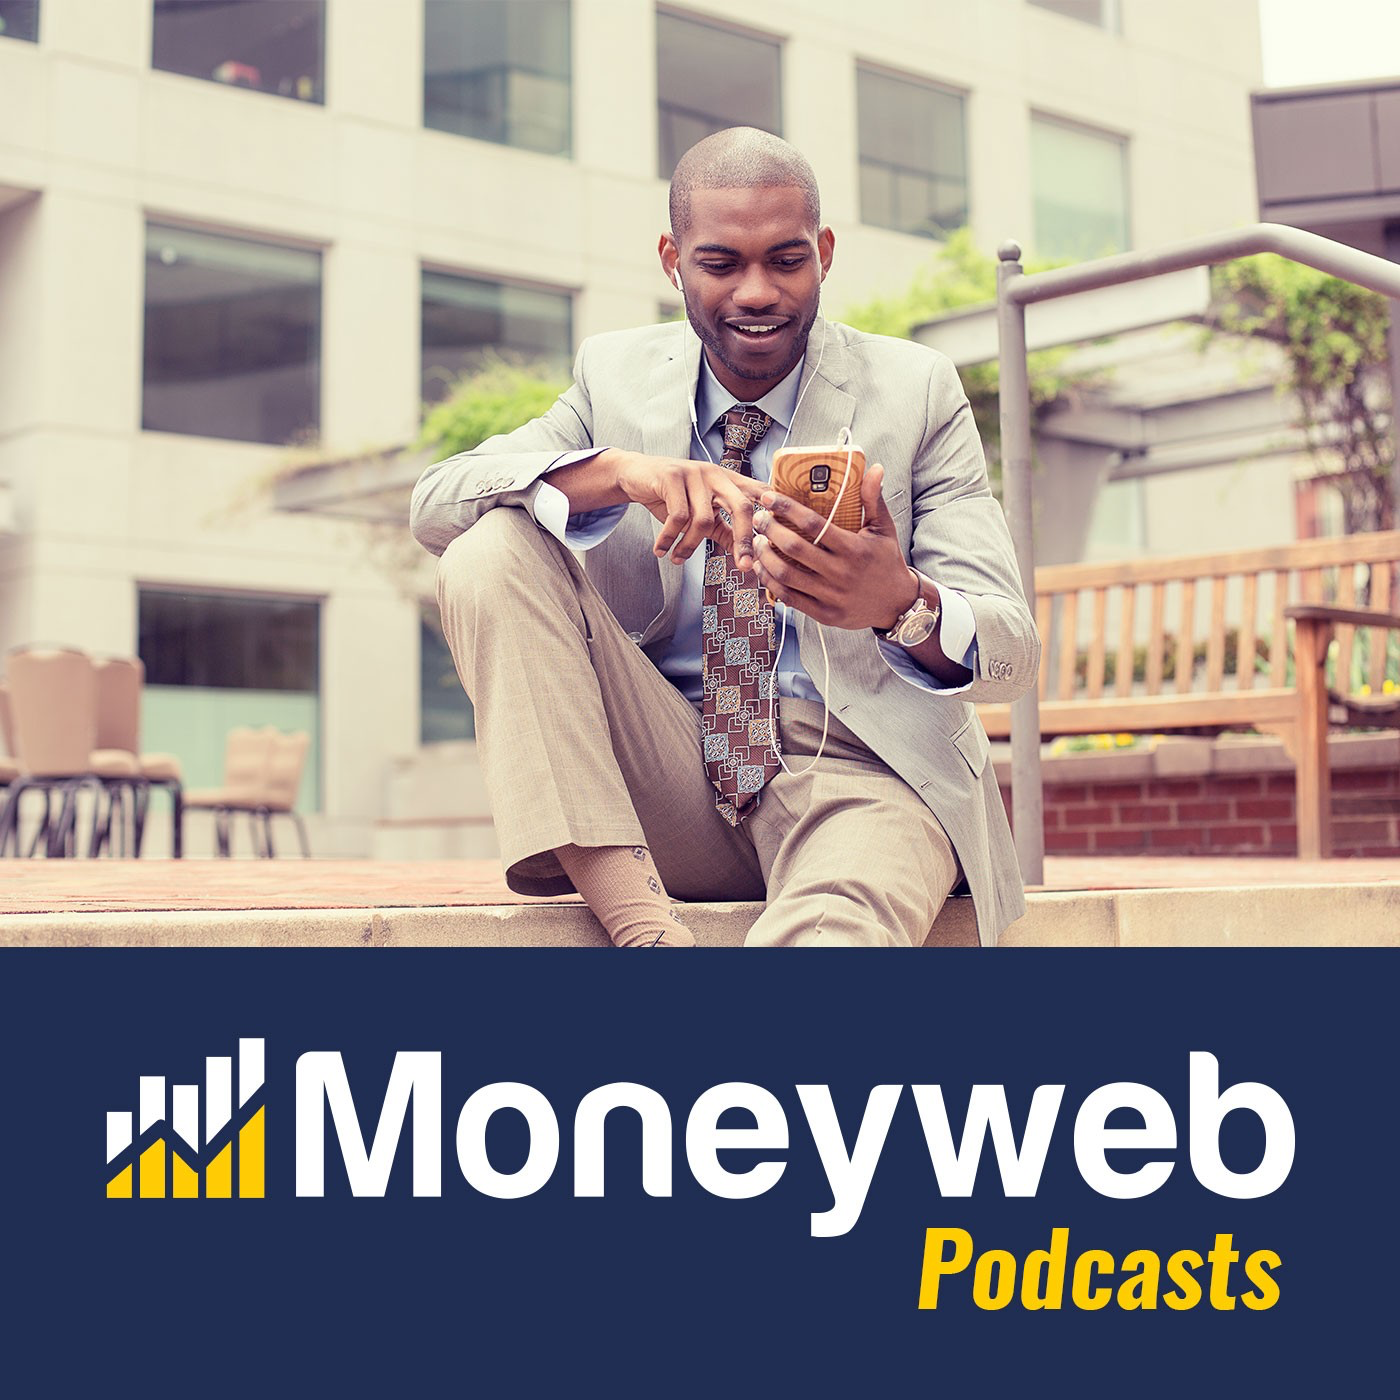 podcast_moneyweb-midday_eoh-reports-fall-headline-e_1000421064109_itemimage